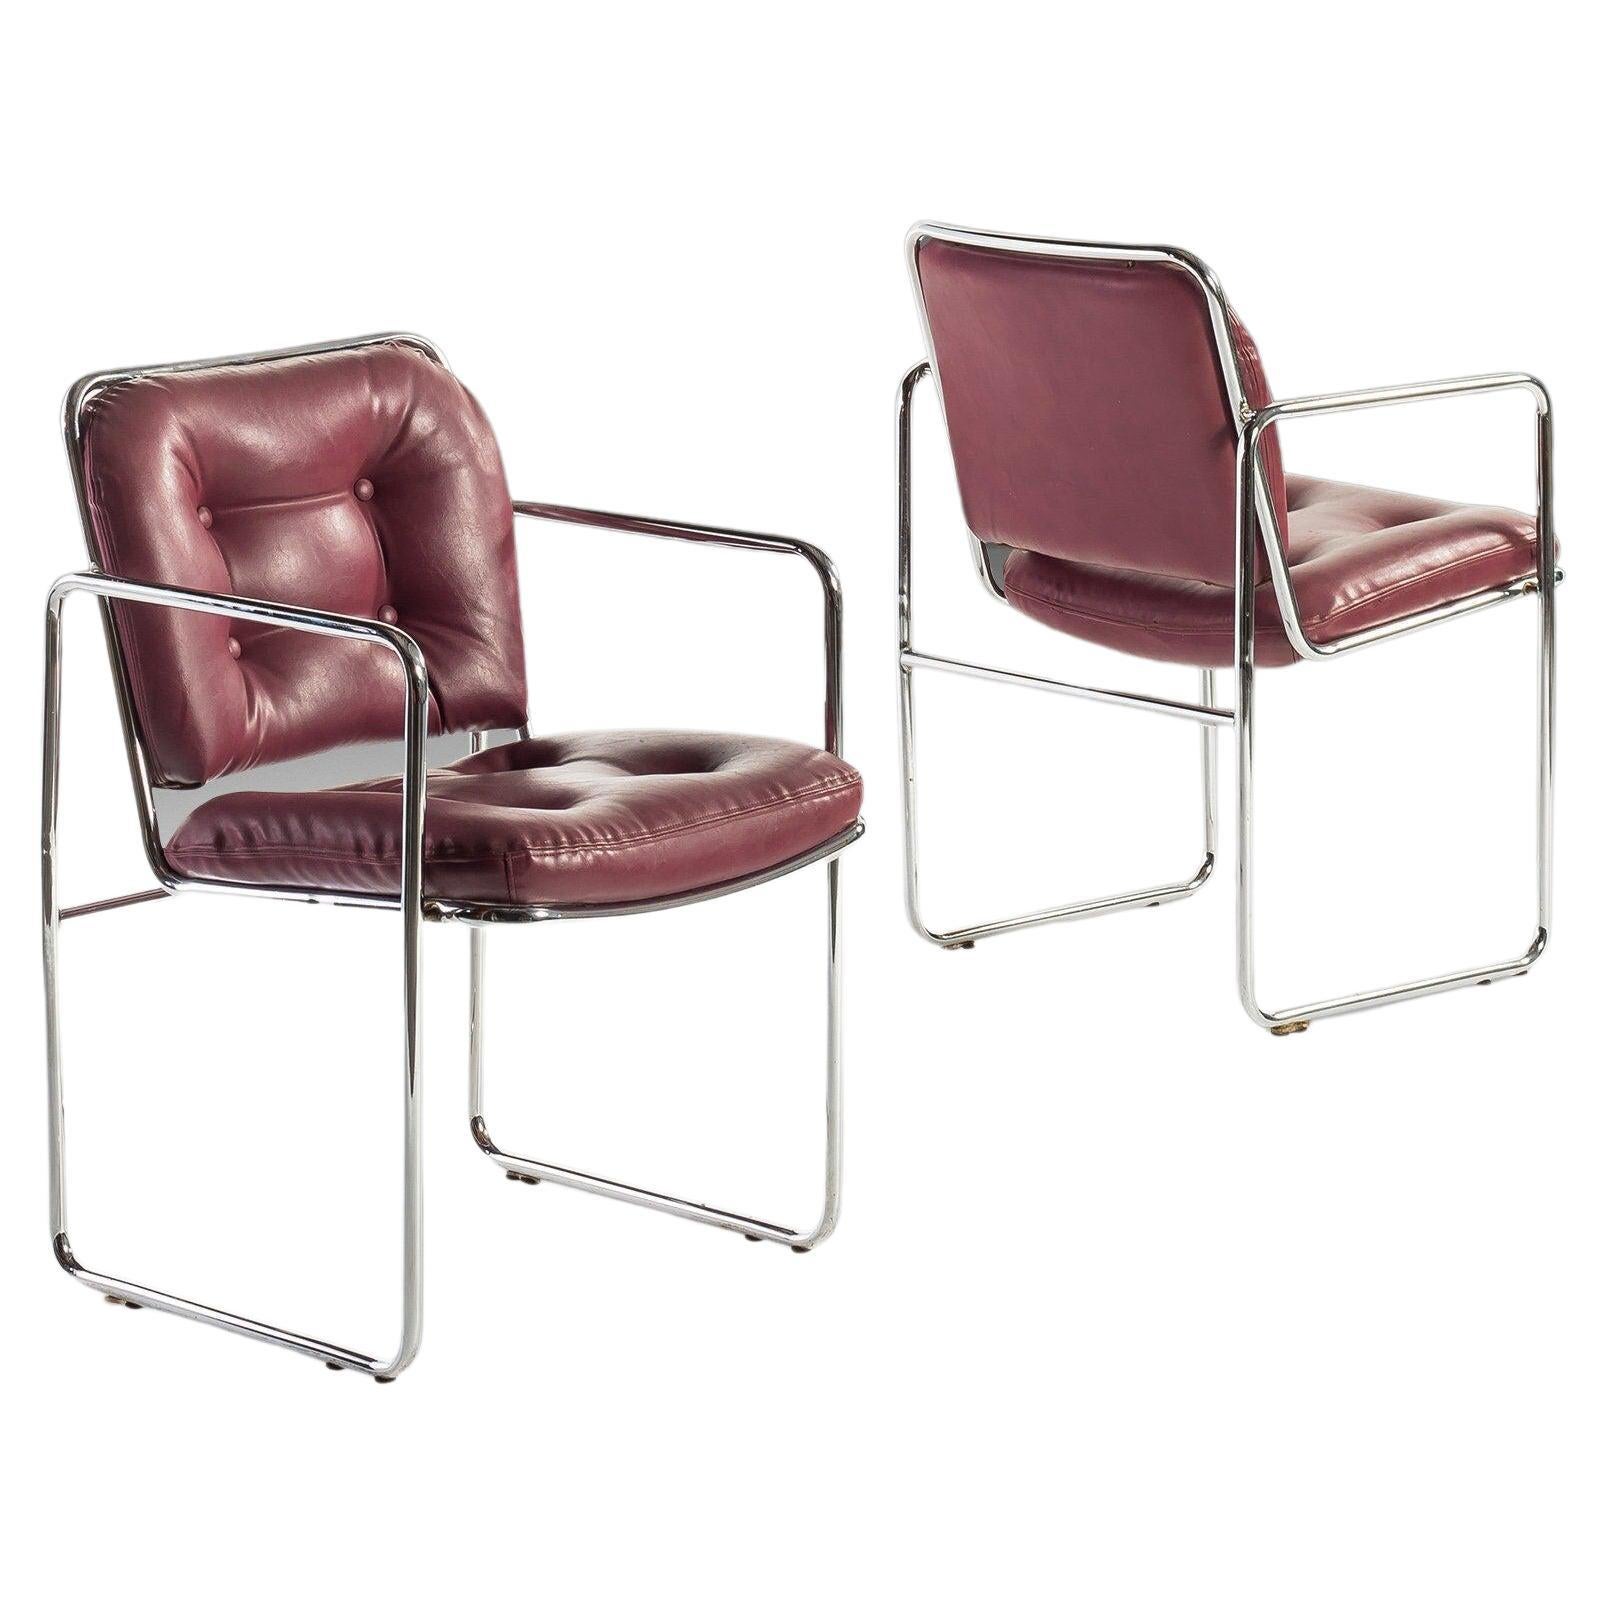 MCM Tubular Chrome Lounge Chairs by Chromcraft with Rich Oxblood Seats, c. 1960s For Sale